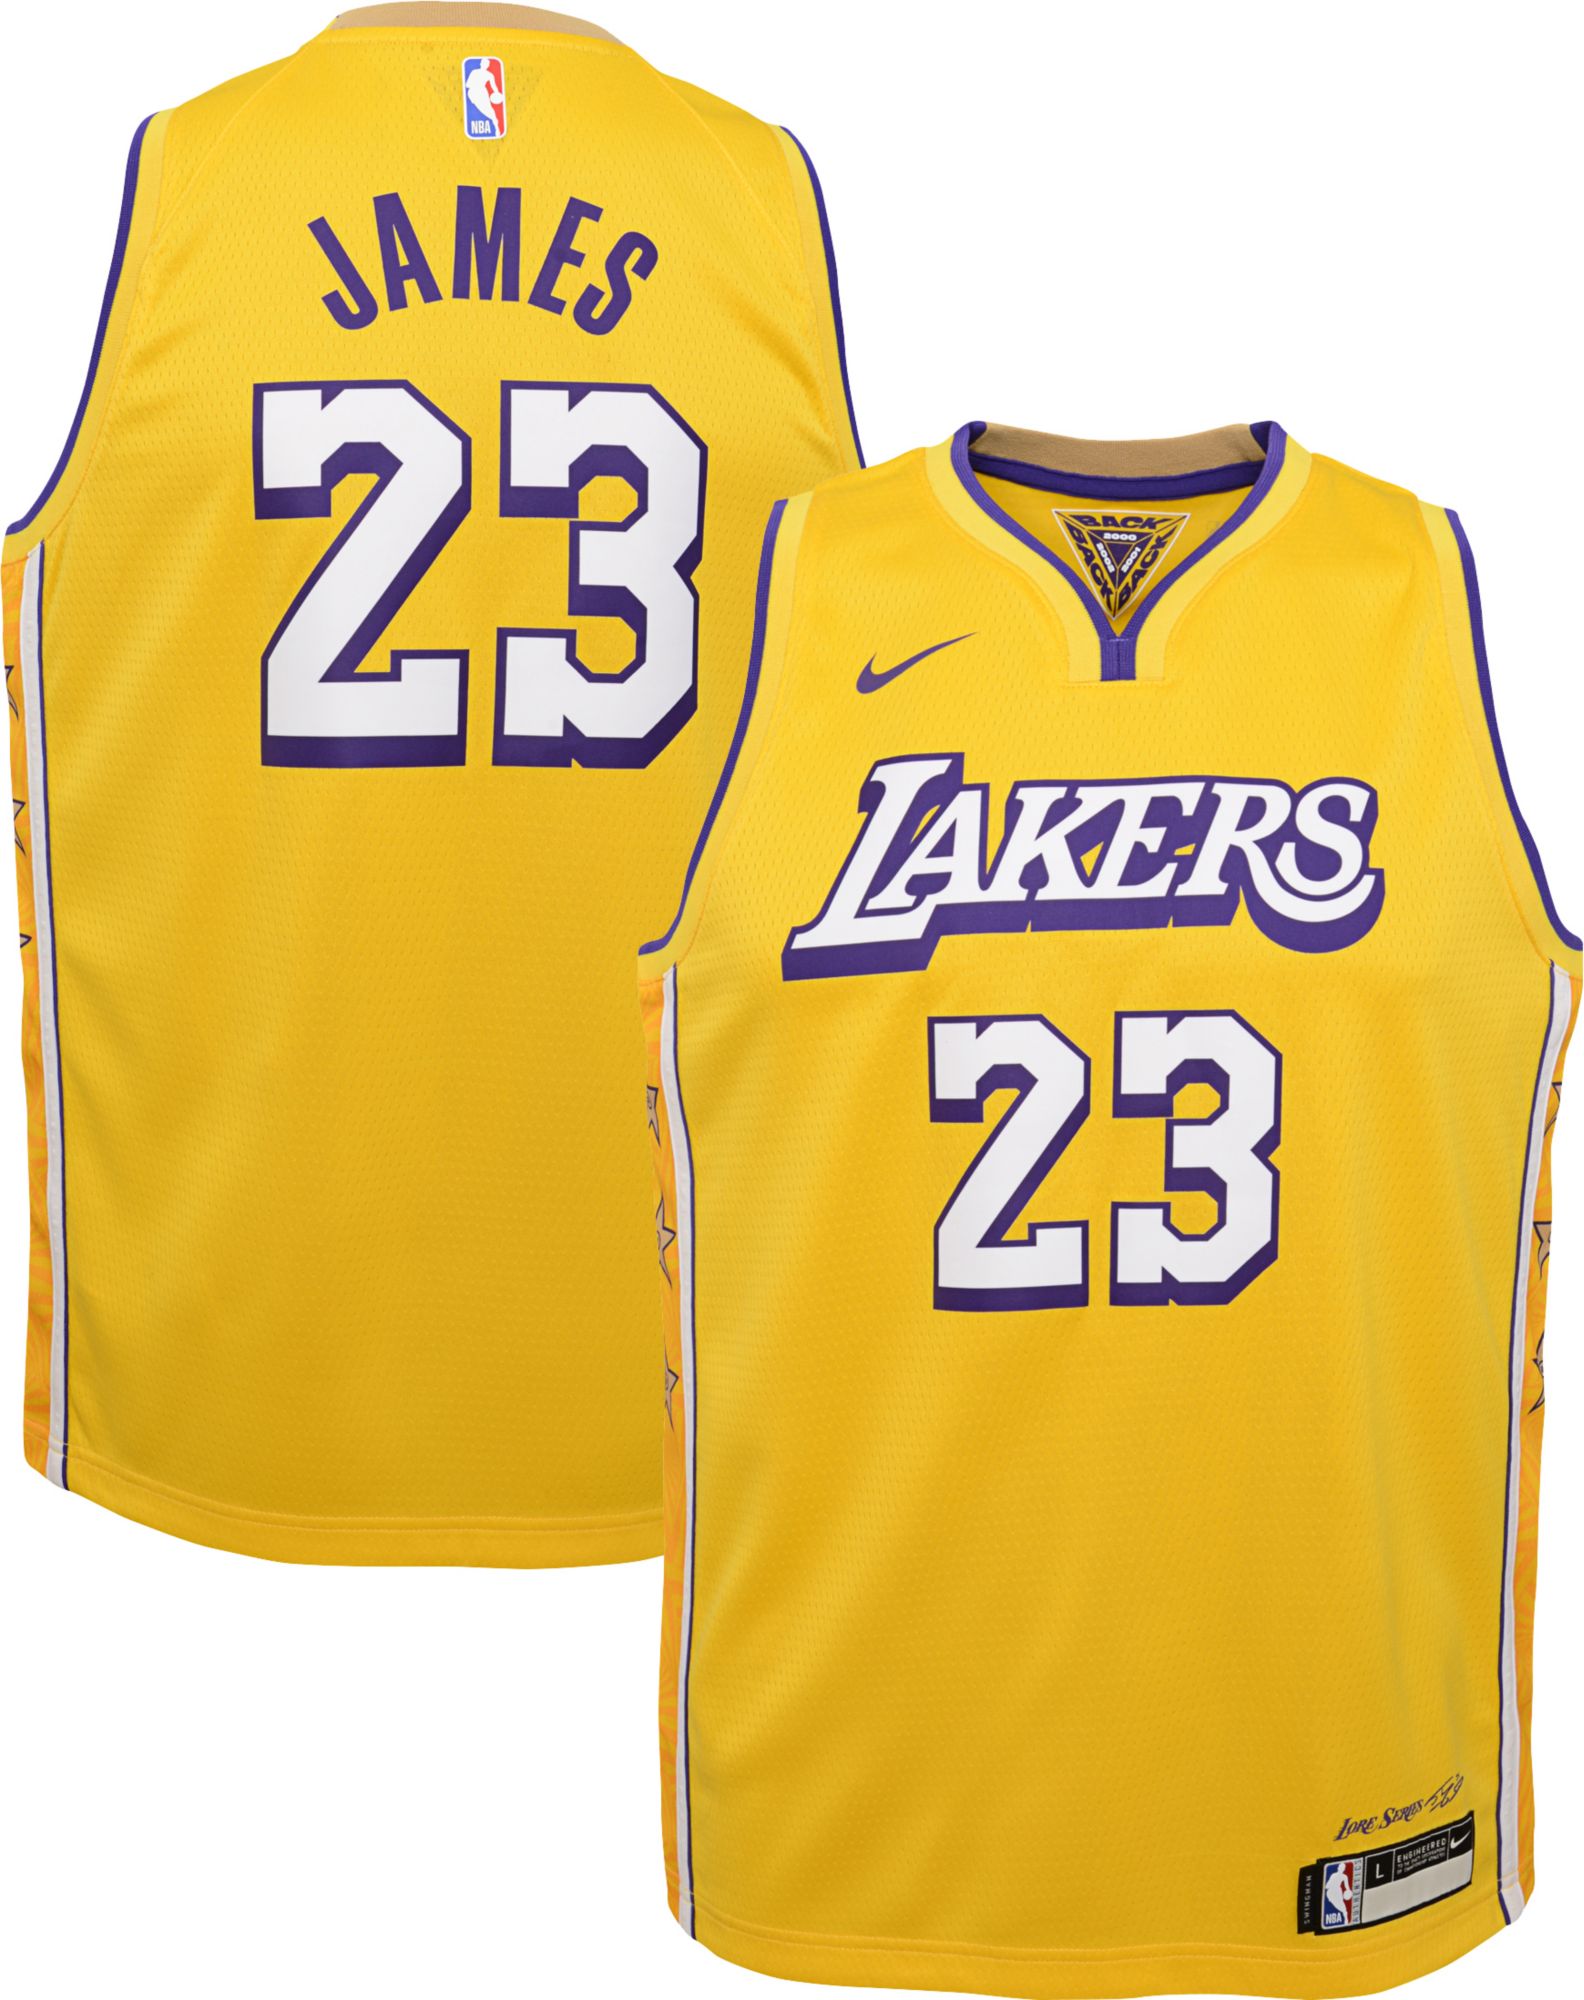 lebron james lakers jersey city edition